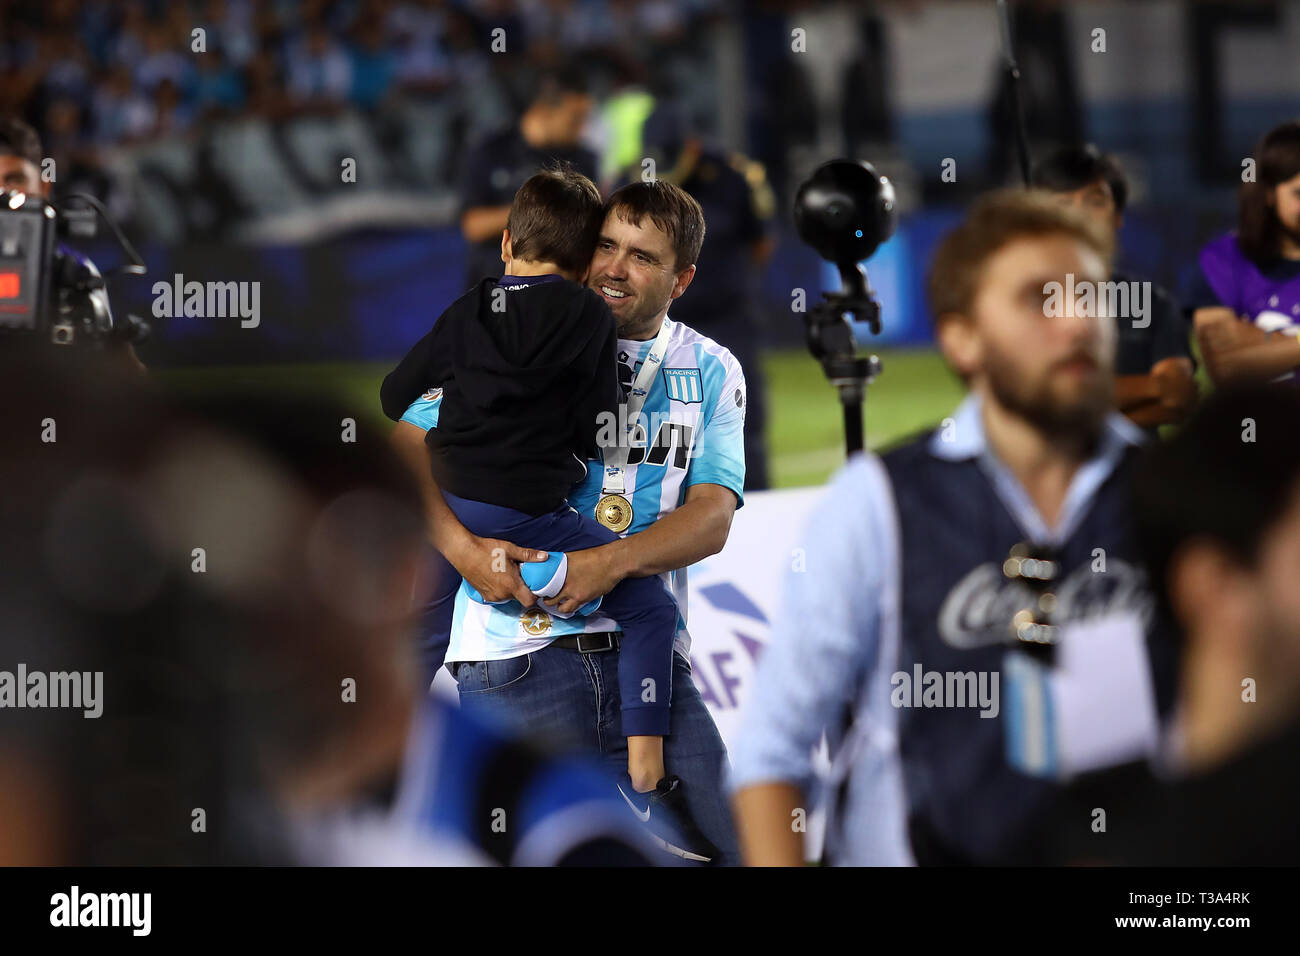 Buenos Aires, Argentina - April 07, 2019: Eduardo Coudet (DT Racing) with his son celebrating the championship in the Juan Domingo Peron Stadium in Bu Stock Photo